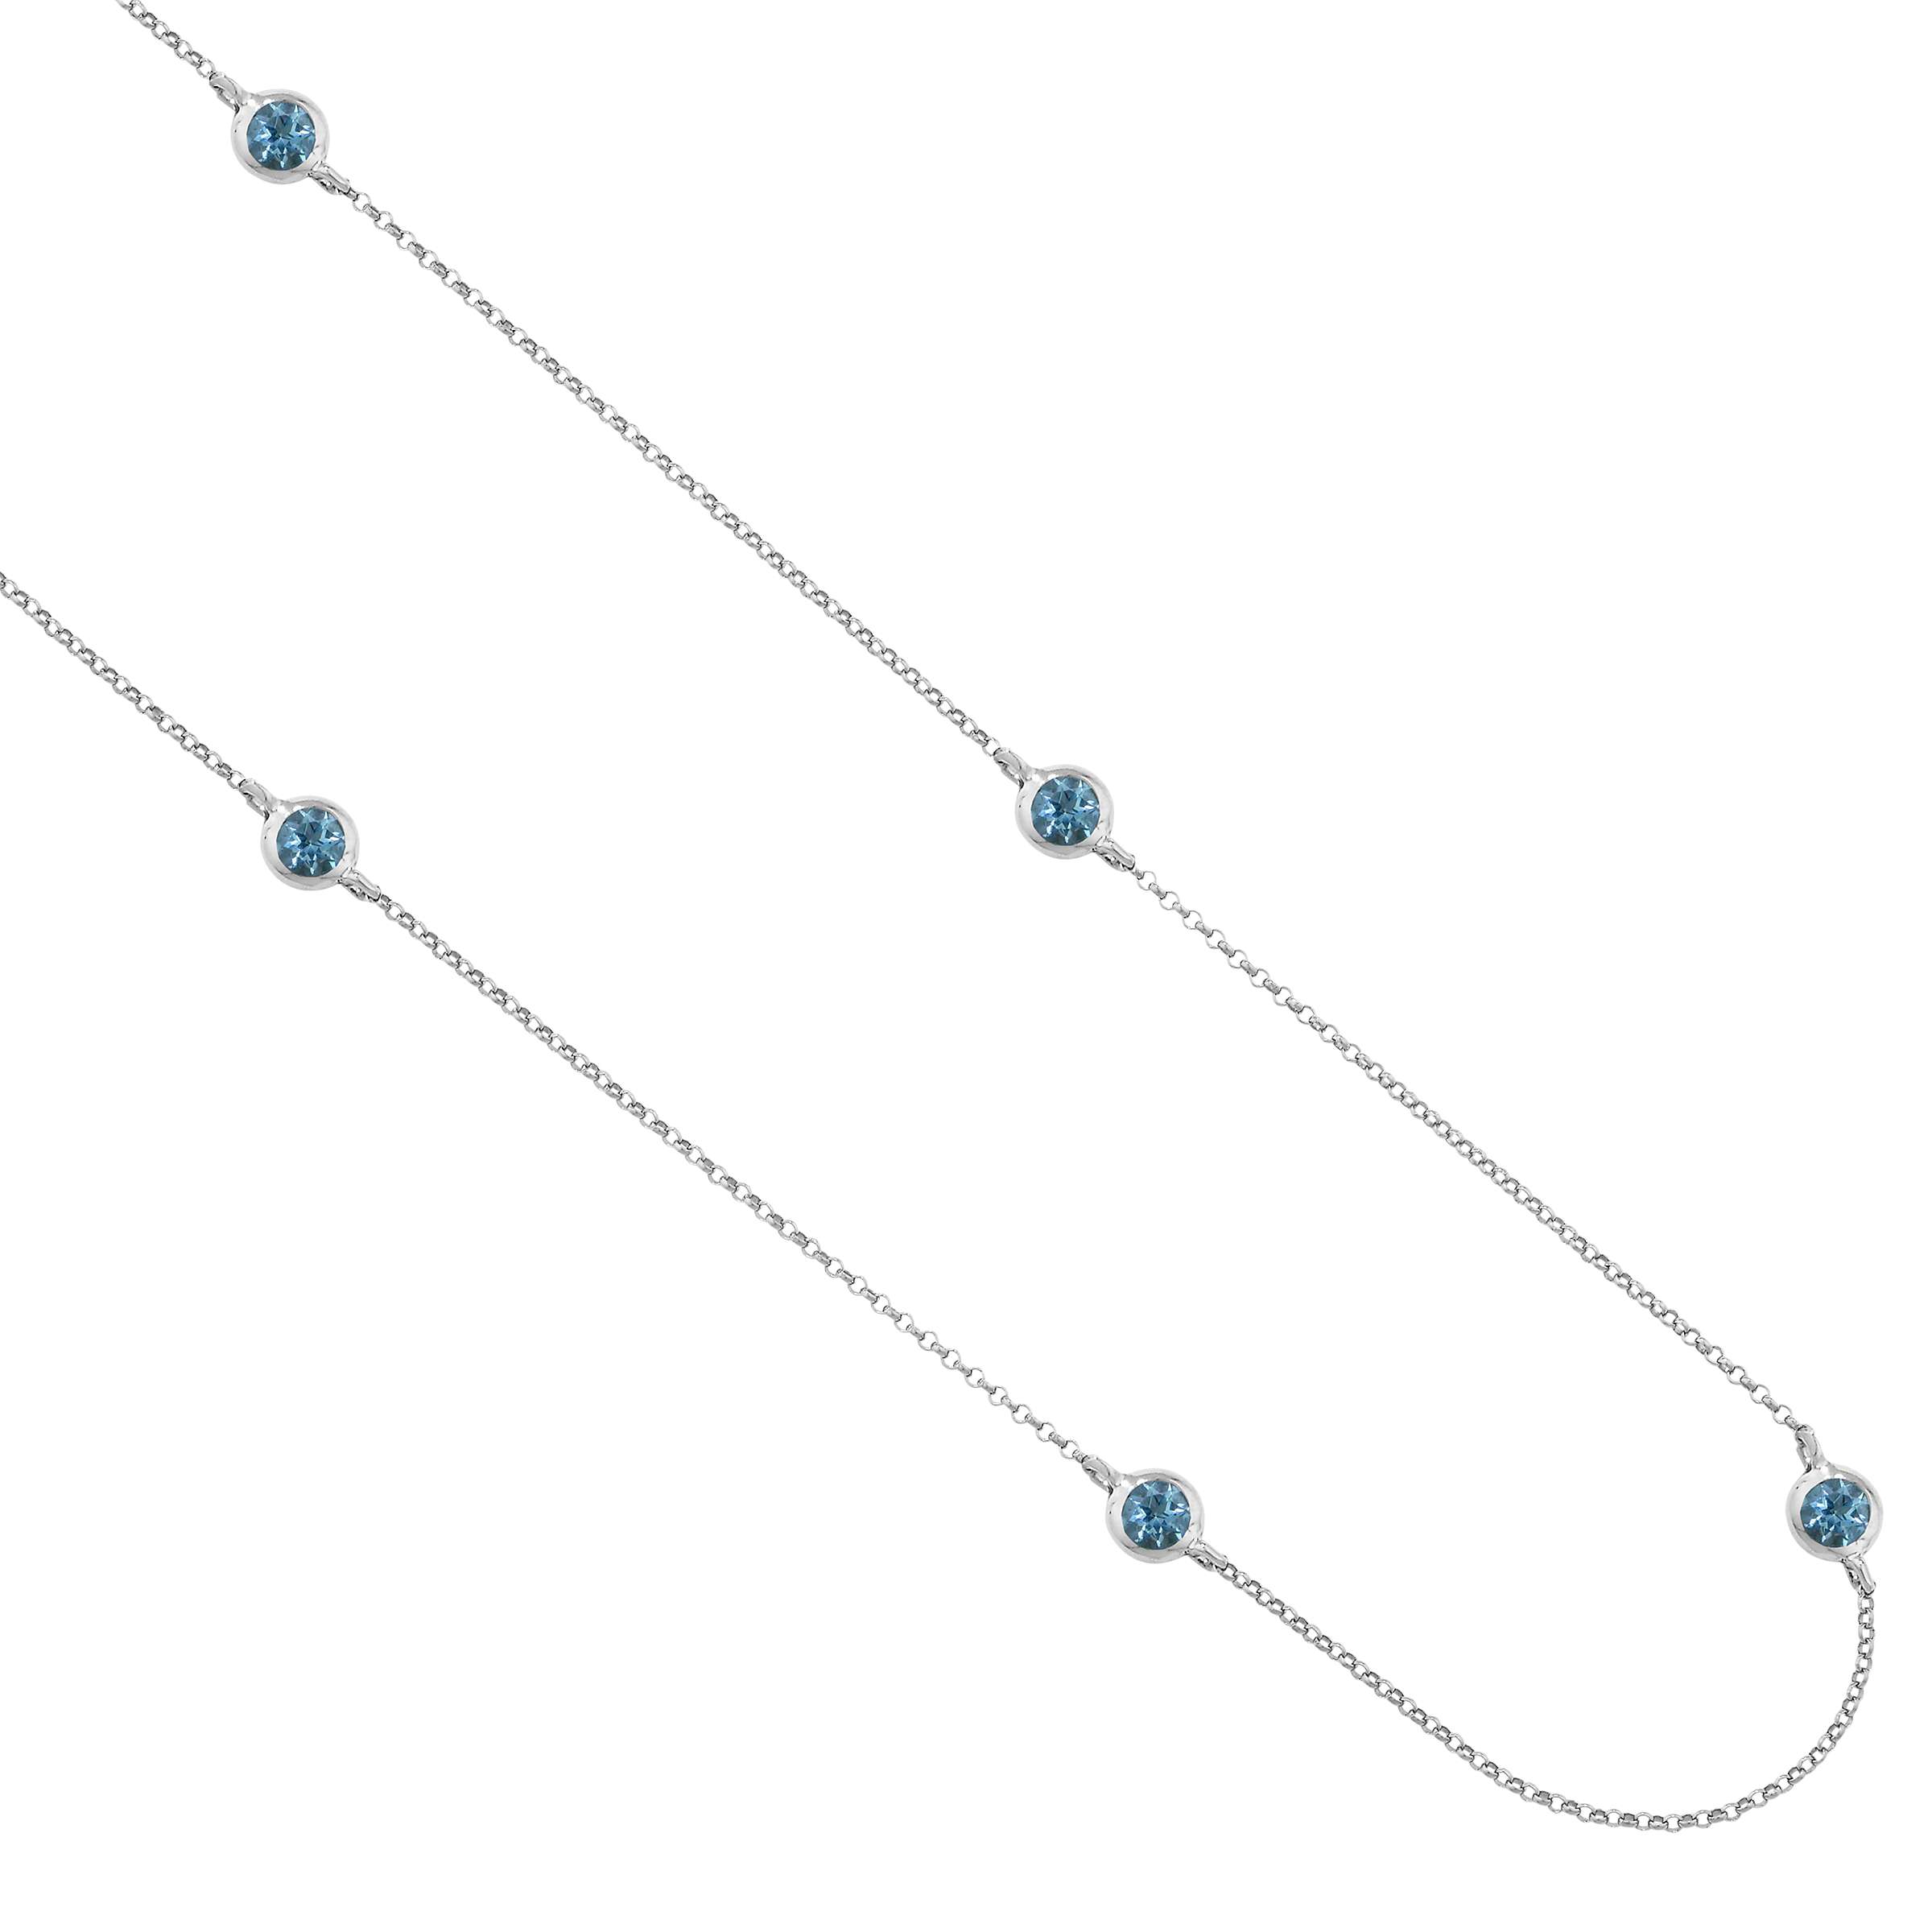 Buy London Road 9ct Gold Raindrop Necklace Online at johnlewis.com